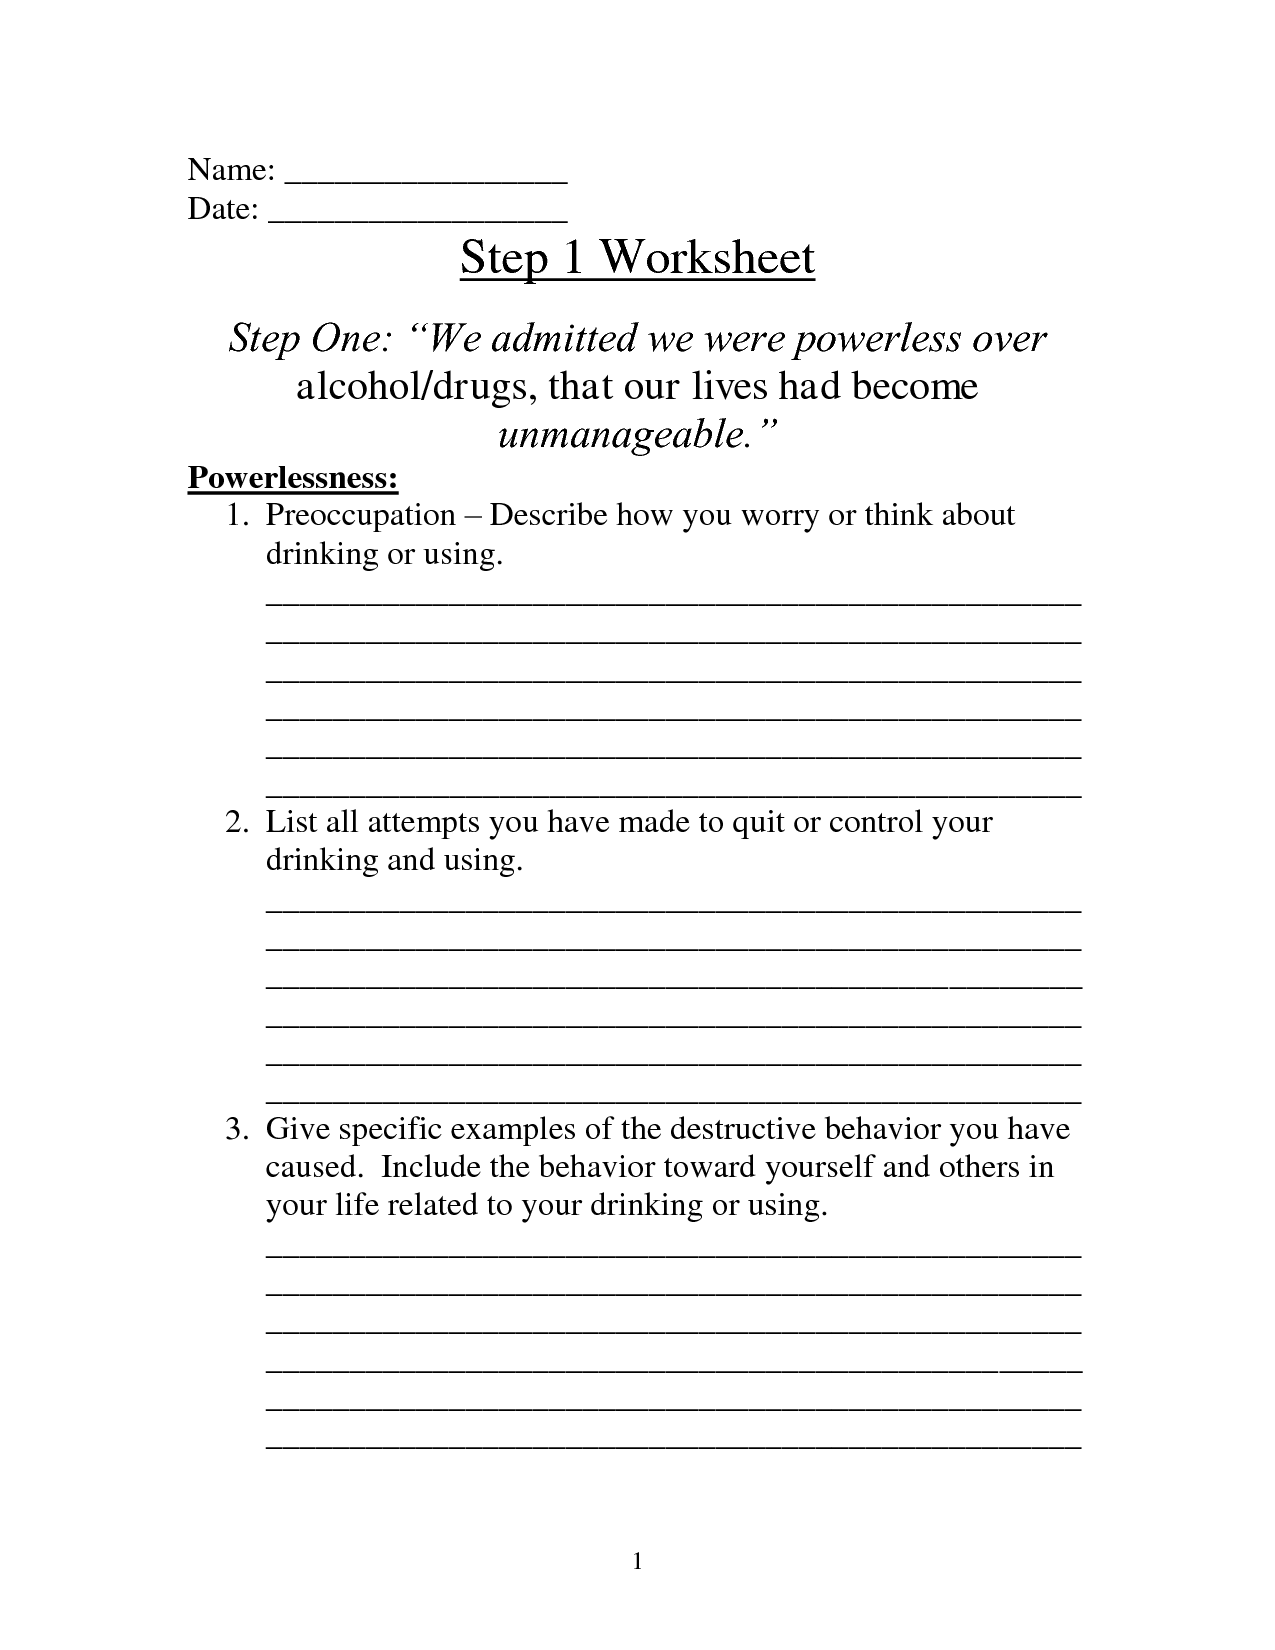 15-best-images-of-step-8-worksheets-multi-step-word-problems